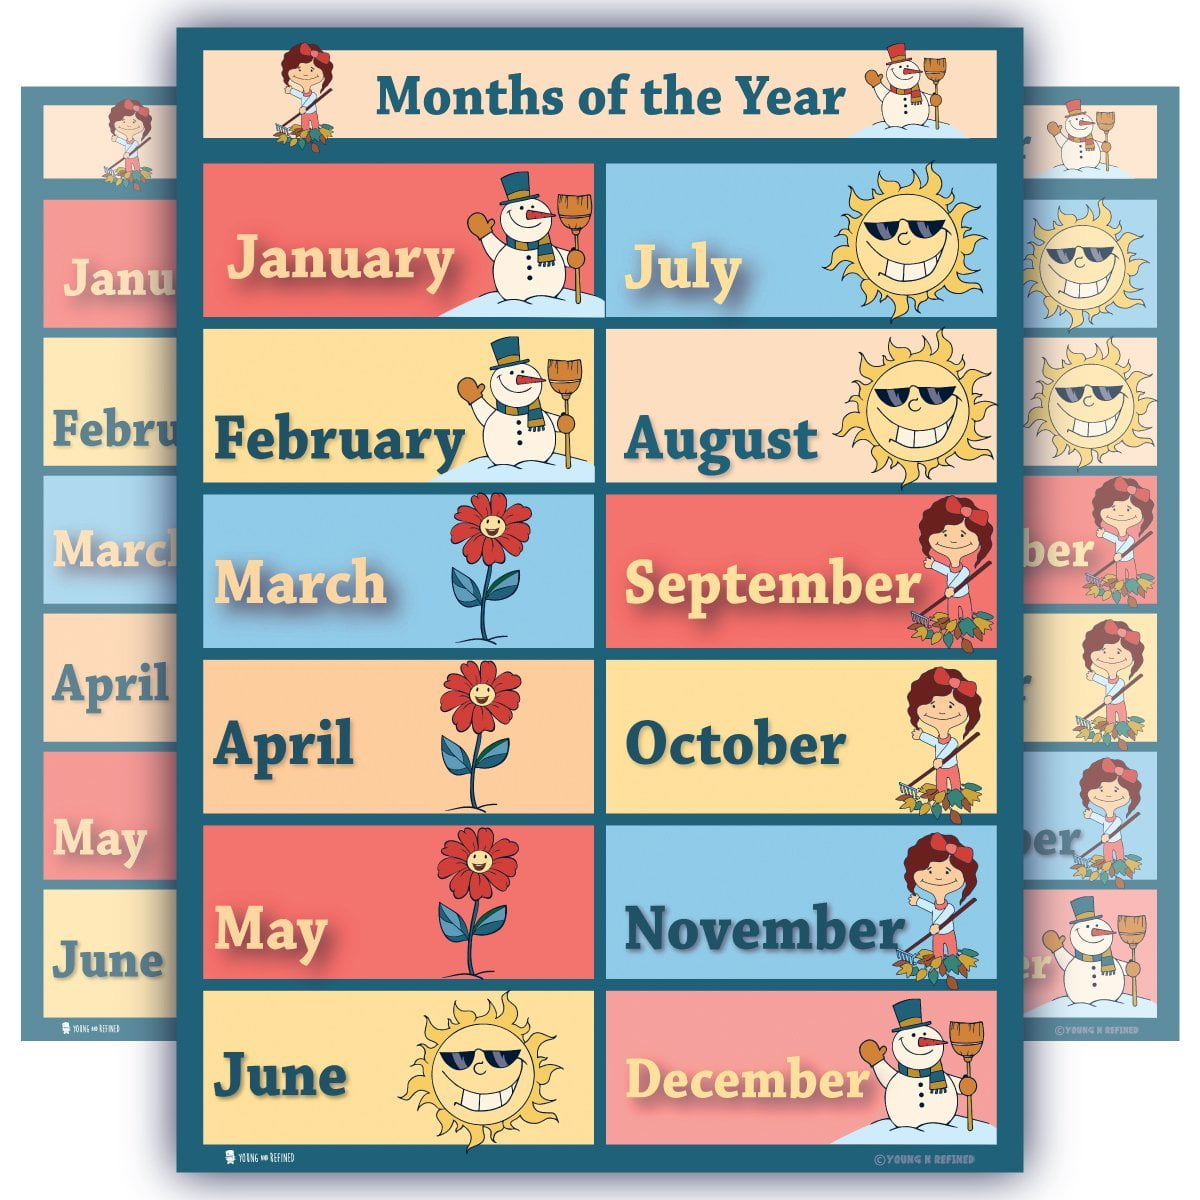 Learning months of year chart LAMINATED educational seasons poster for